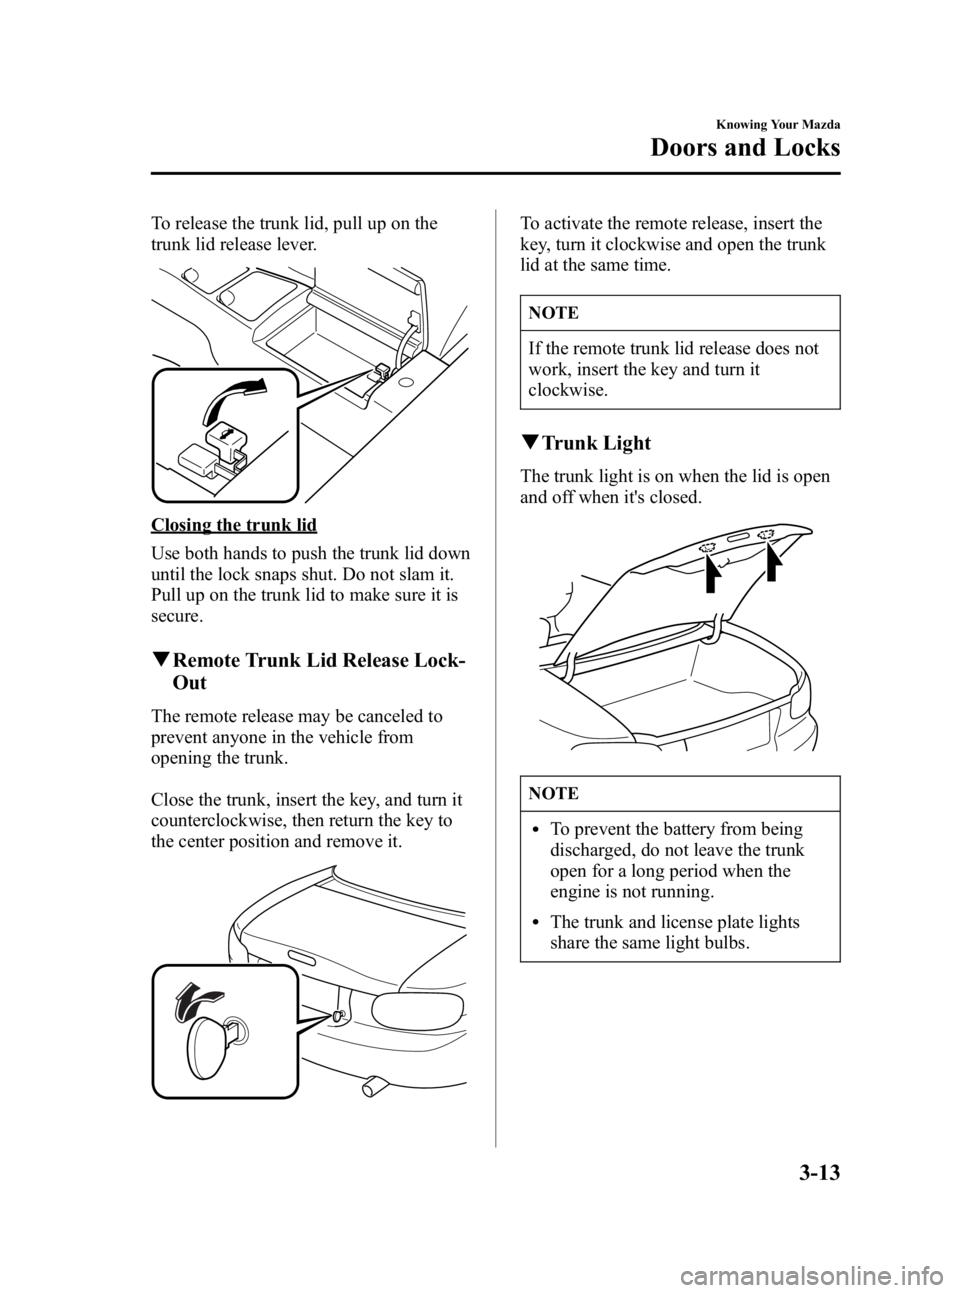 MAZDA MODEL MX-5 MIATA 2005 Workshop Manual Black plate (55,1)
To release the trunk lid, pull up on the
trunk lid release lever.
Closing the trunk lid
Use both hands to push the trunk lid down
until the lock snaps shut. Do not slam it.
Pull up 